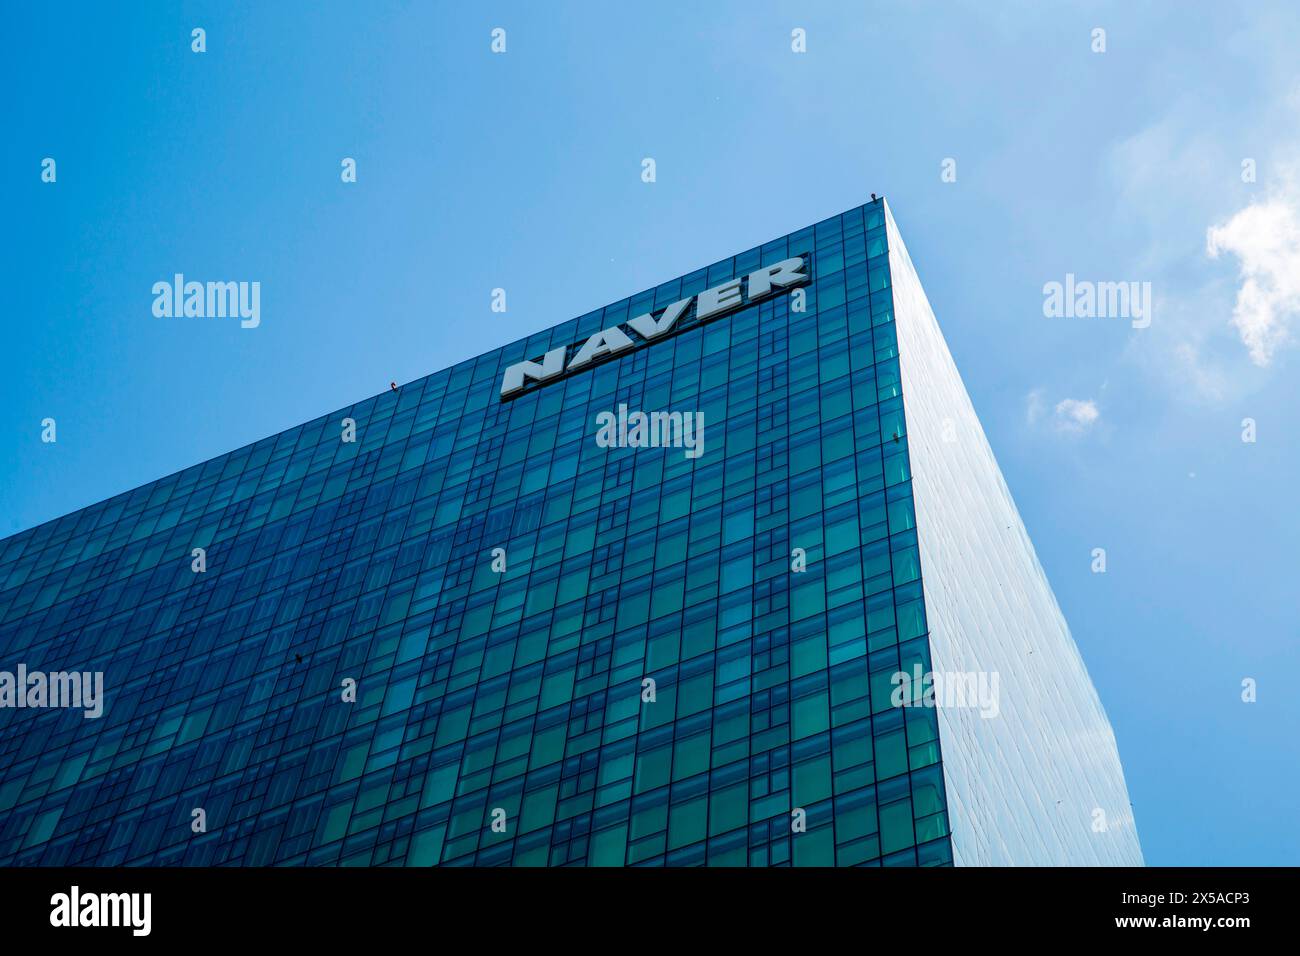 Naver, May 8, 2024 : The headquarters of South Korea's tech giant Naver Corp. in Seongnam, south of Seoul, South Korera. Naver developed mobile messenger 'Line' in 2011 and it had about 96 million users in Japan as of 2023, according to Line Plus Corp., Naver's affiliate which operates the mobile application in South Korea. LY Corp. is the operator of Line in Japan and internet portal Yahoo Japan. LY is controlled by A Holdings, a 50-50 joint venture between Naver Corp. and Japan's SoftBank Group. Credit: Lee Jae-Won/AFLO/Alamy Live News Stock Photo